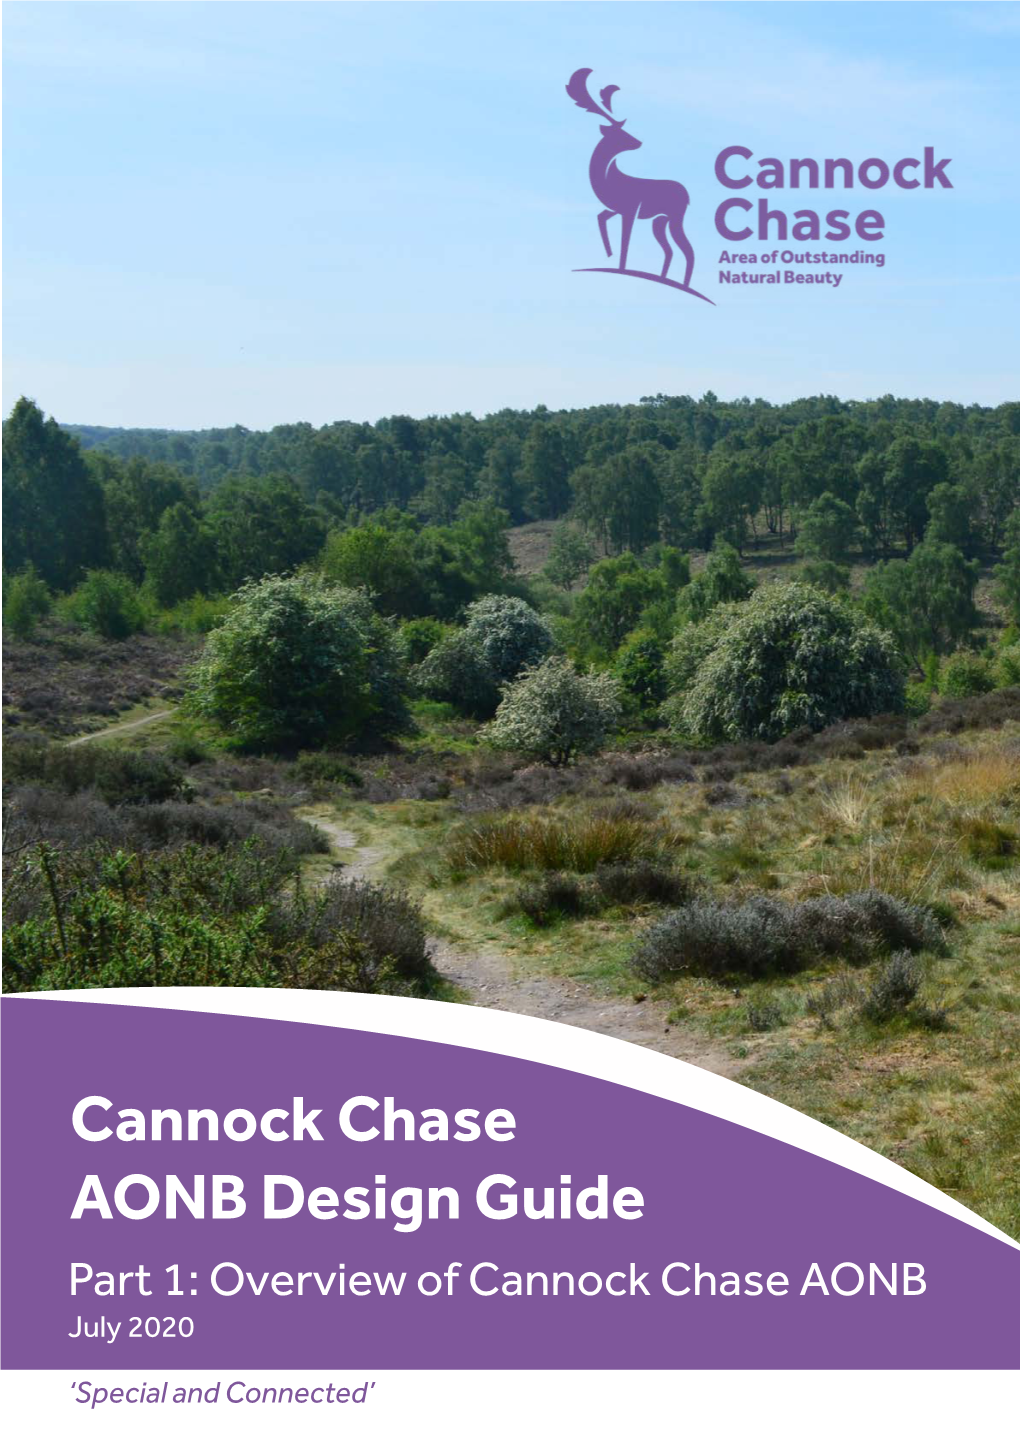 Cannock Chase AONB Design Guide 2020